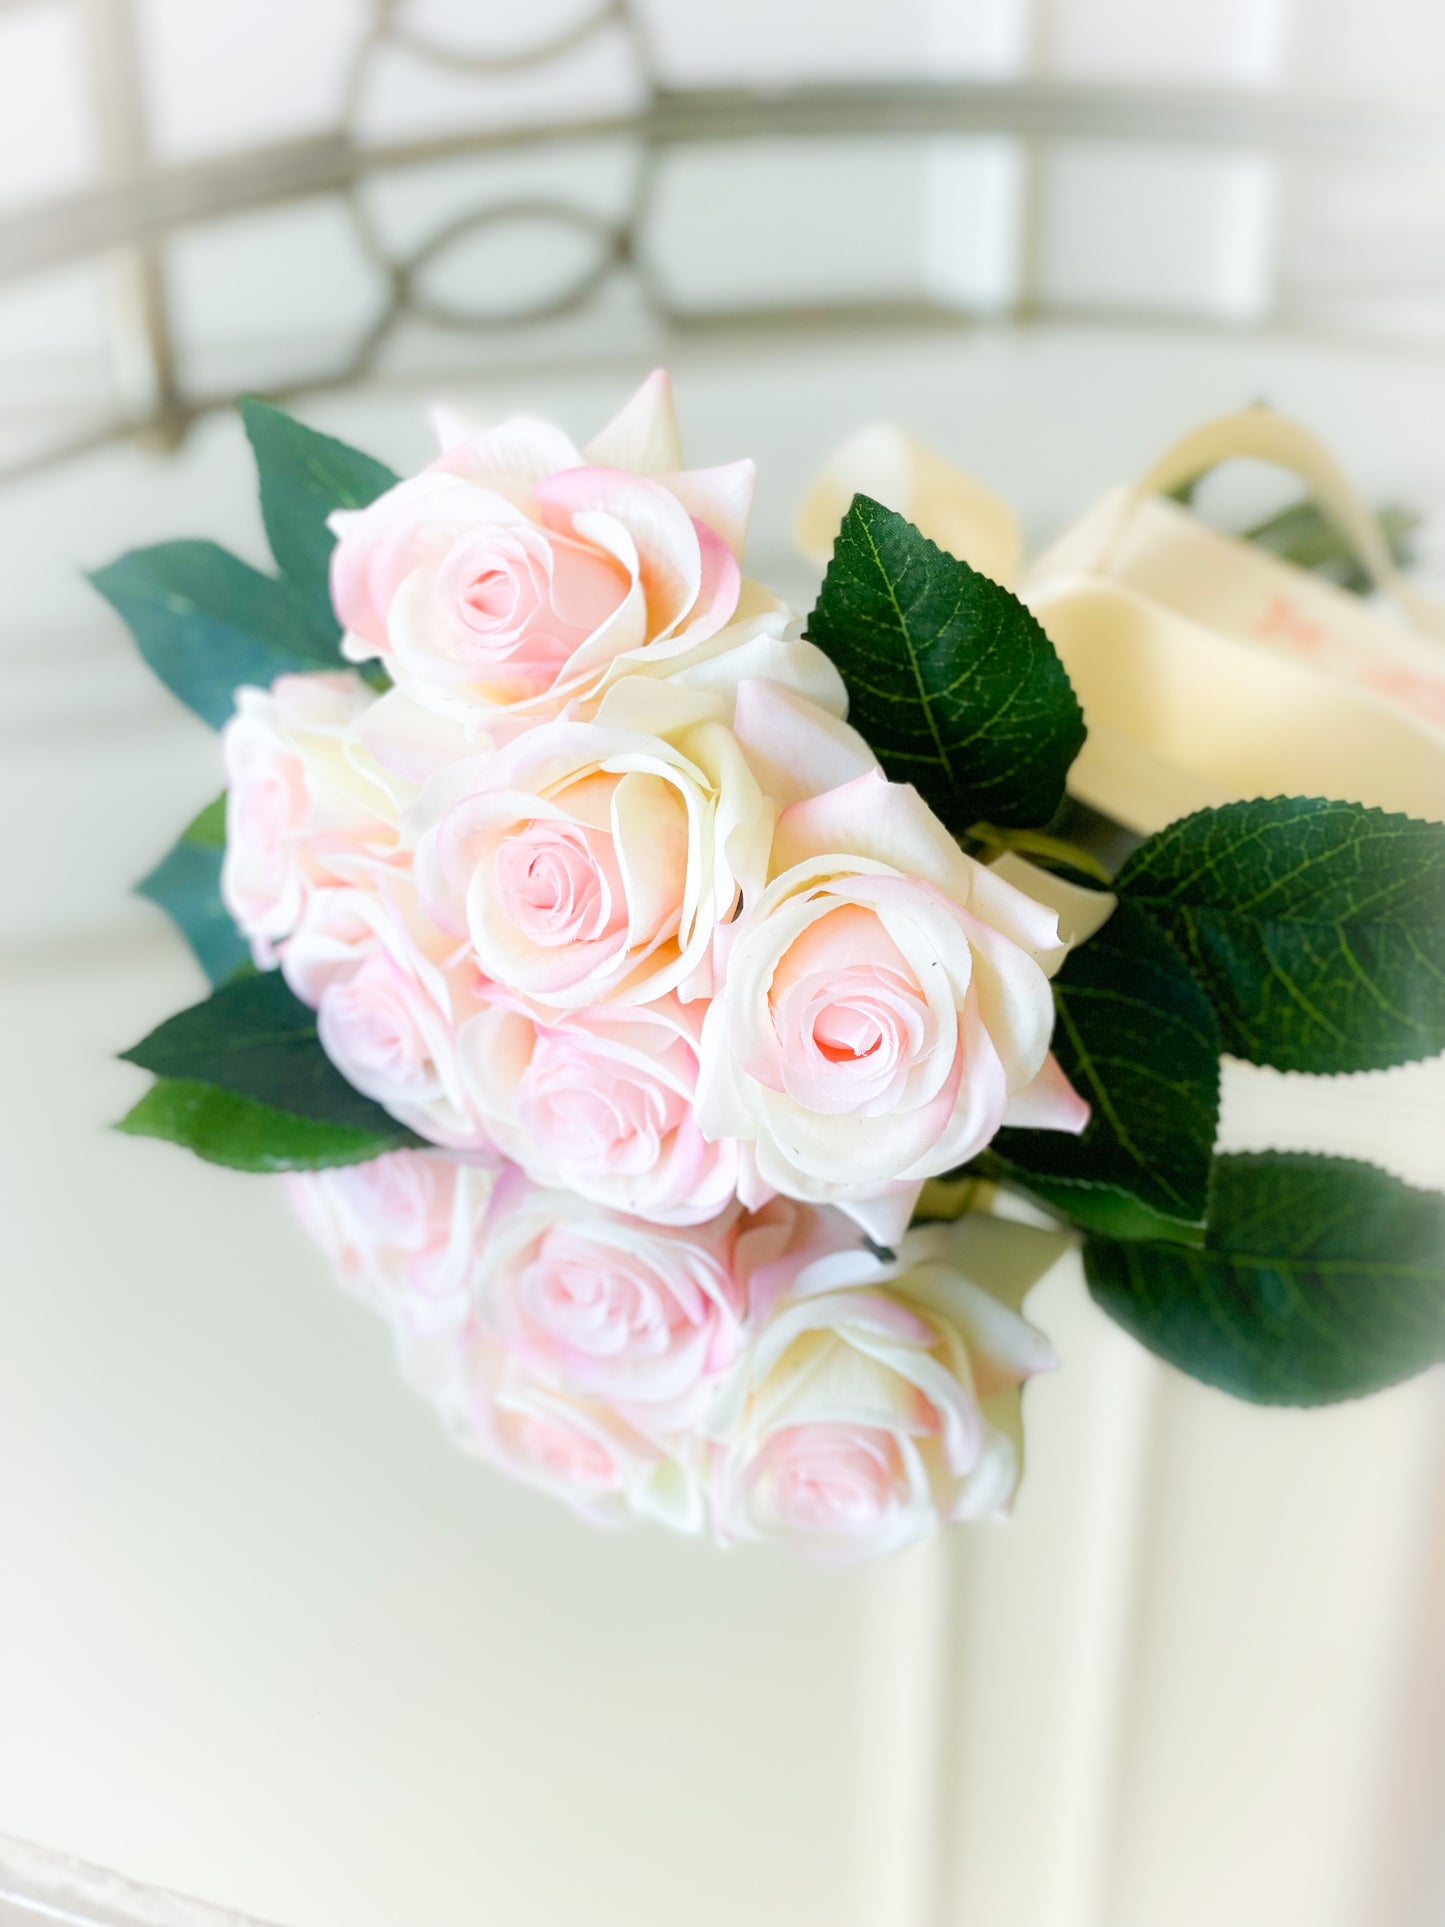 Soft Pink Rose Bouquet With Satin Bow And Dance Card